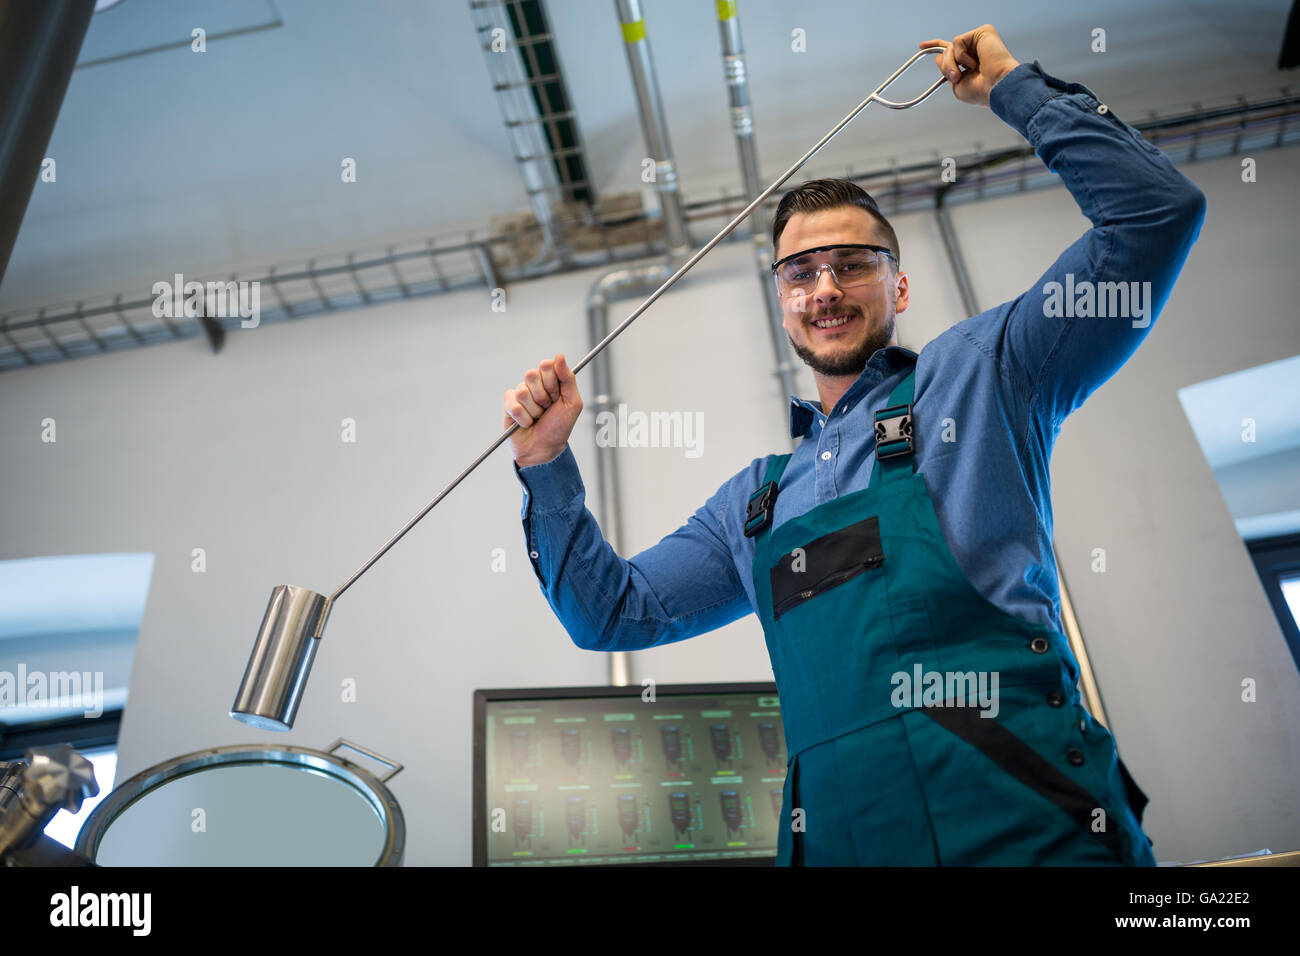 Brewer working at brewery Stock Photo